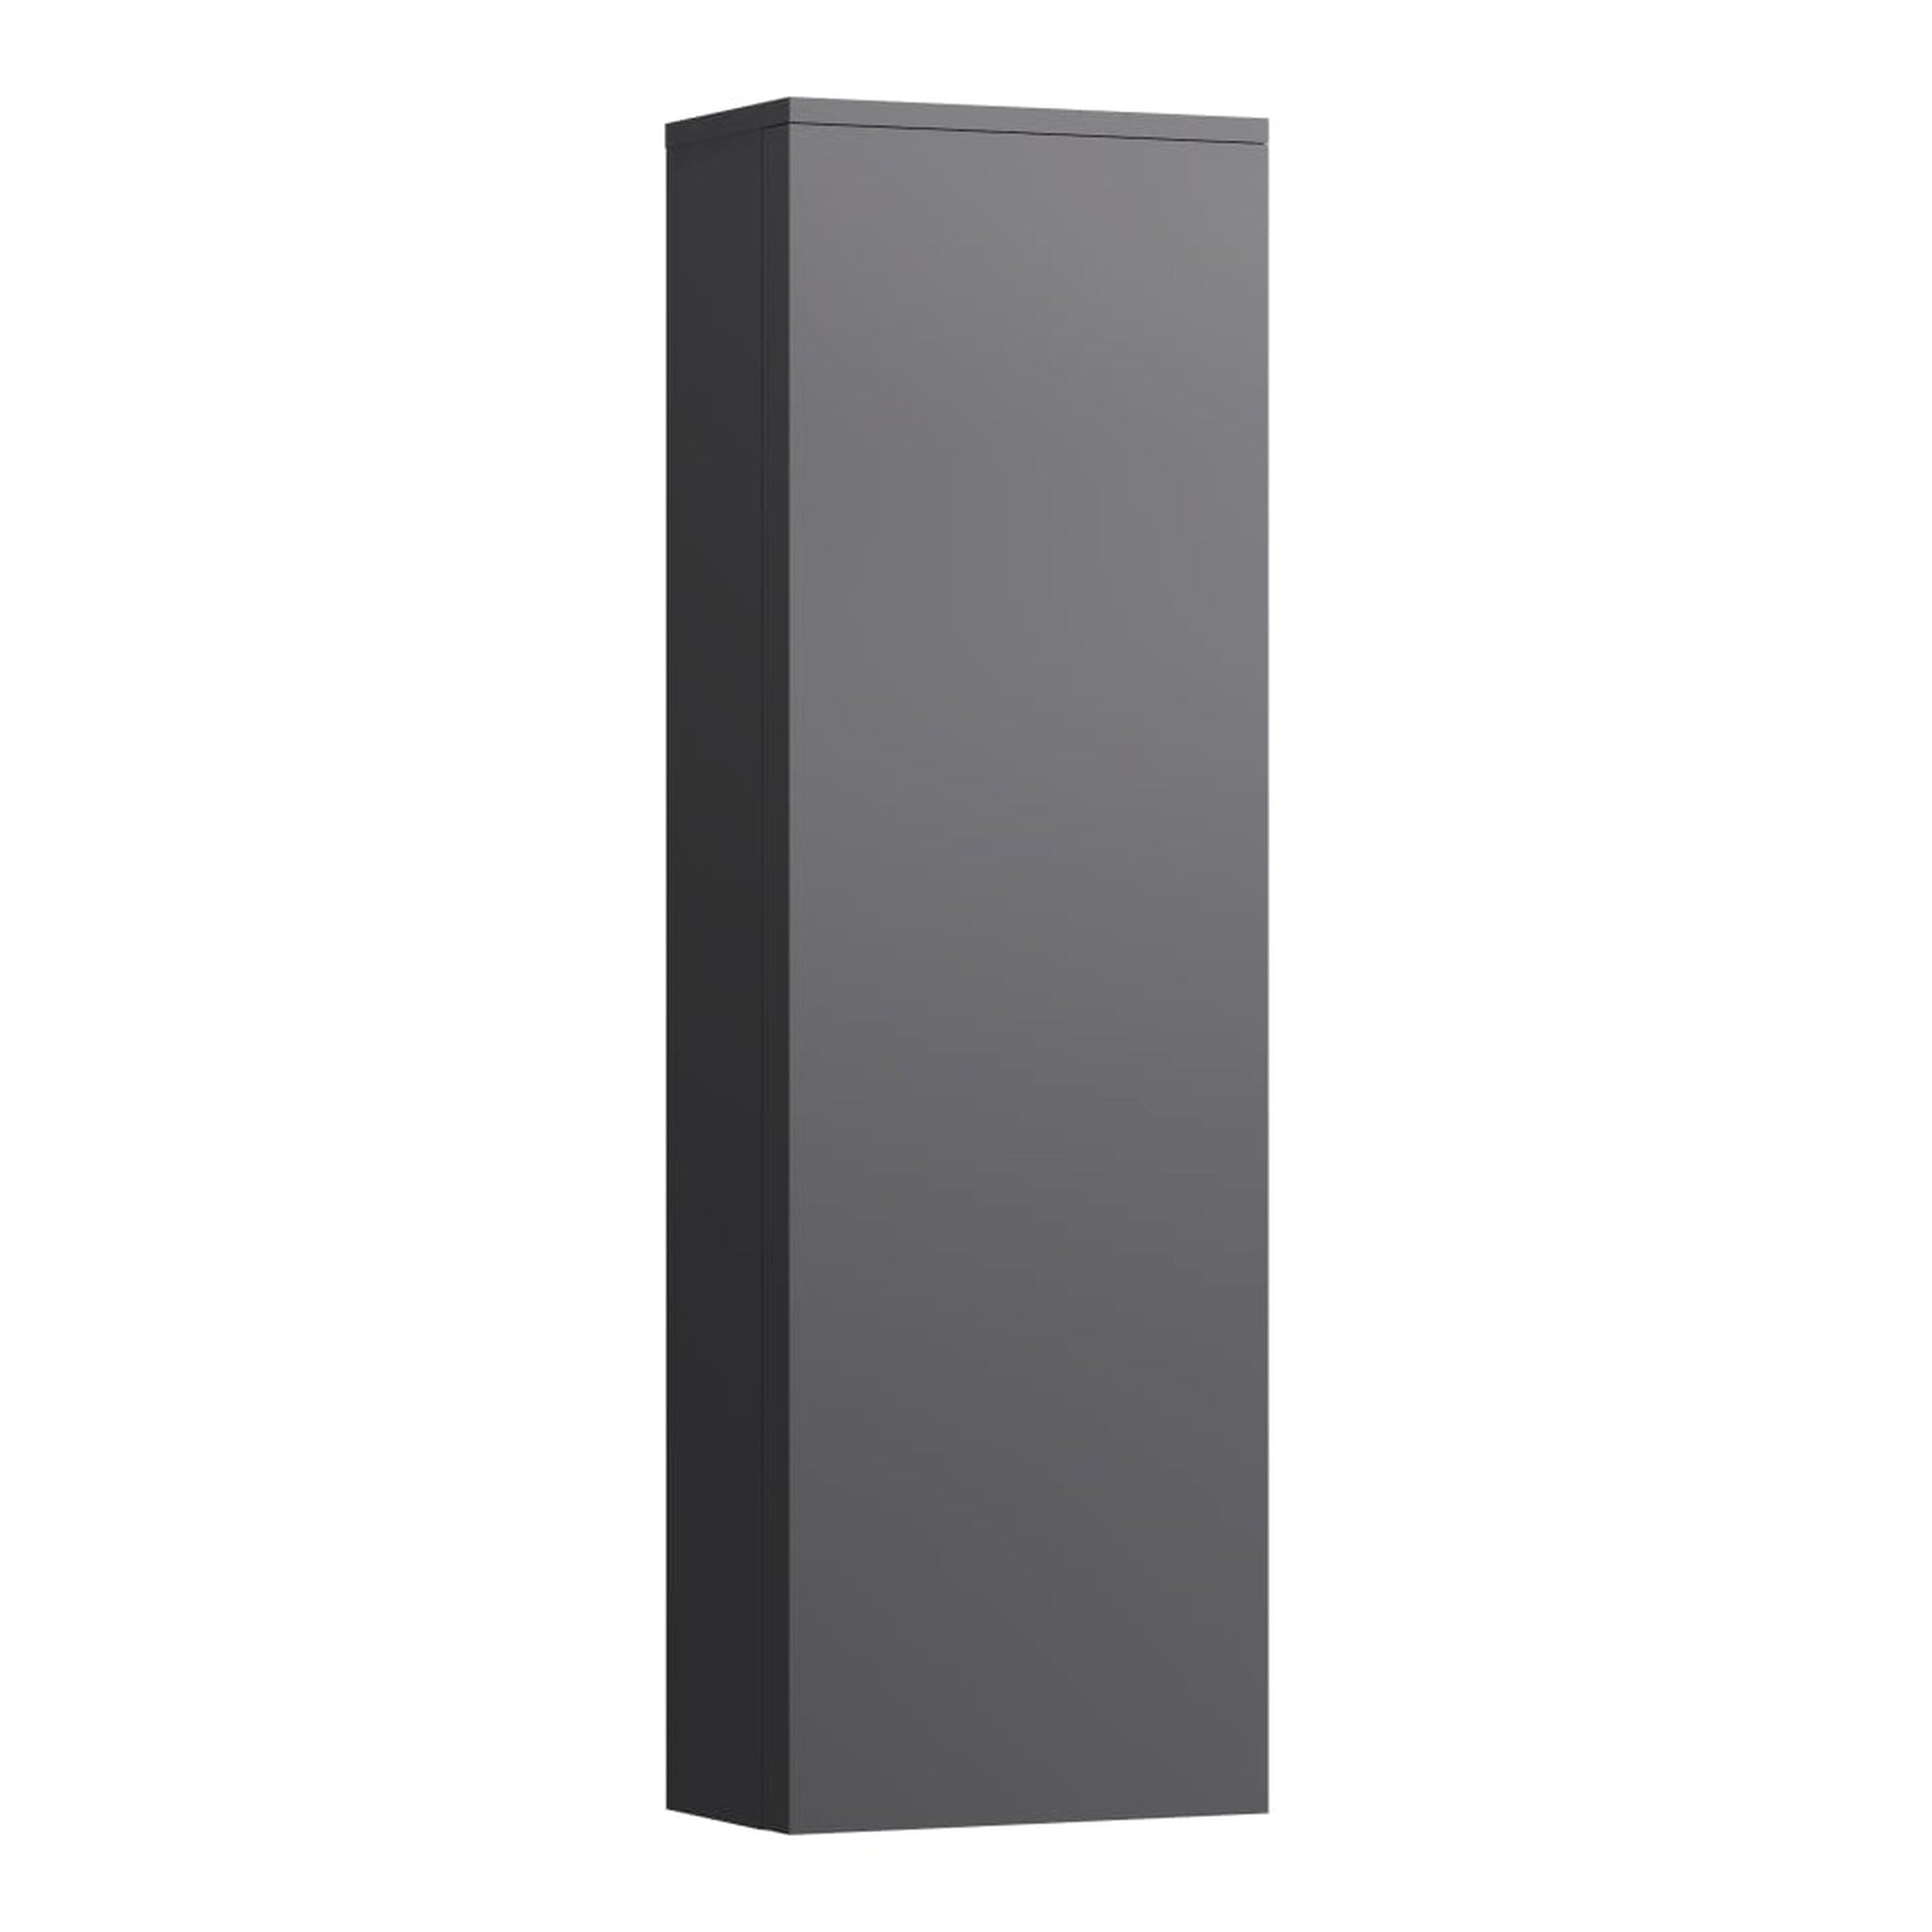 Laufen Kartell 16" x 51" 1-Door Left-Hinged Slate Gray Wall-Mounted Tall Cabinet With 4 Fixed Glass Shelves